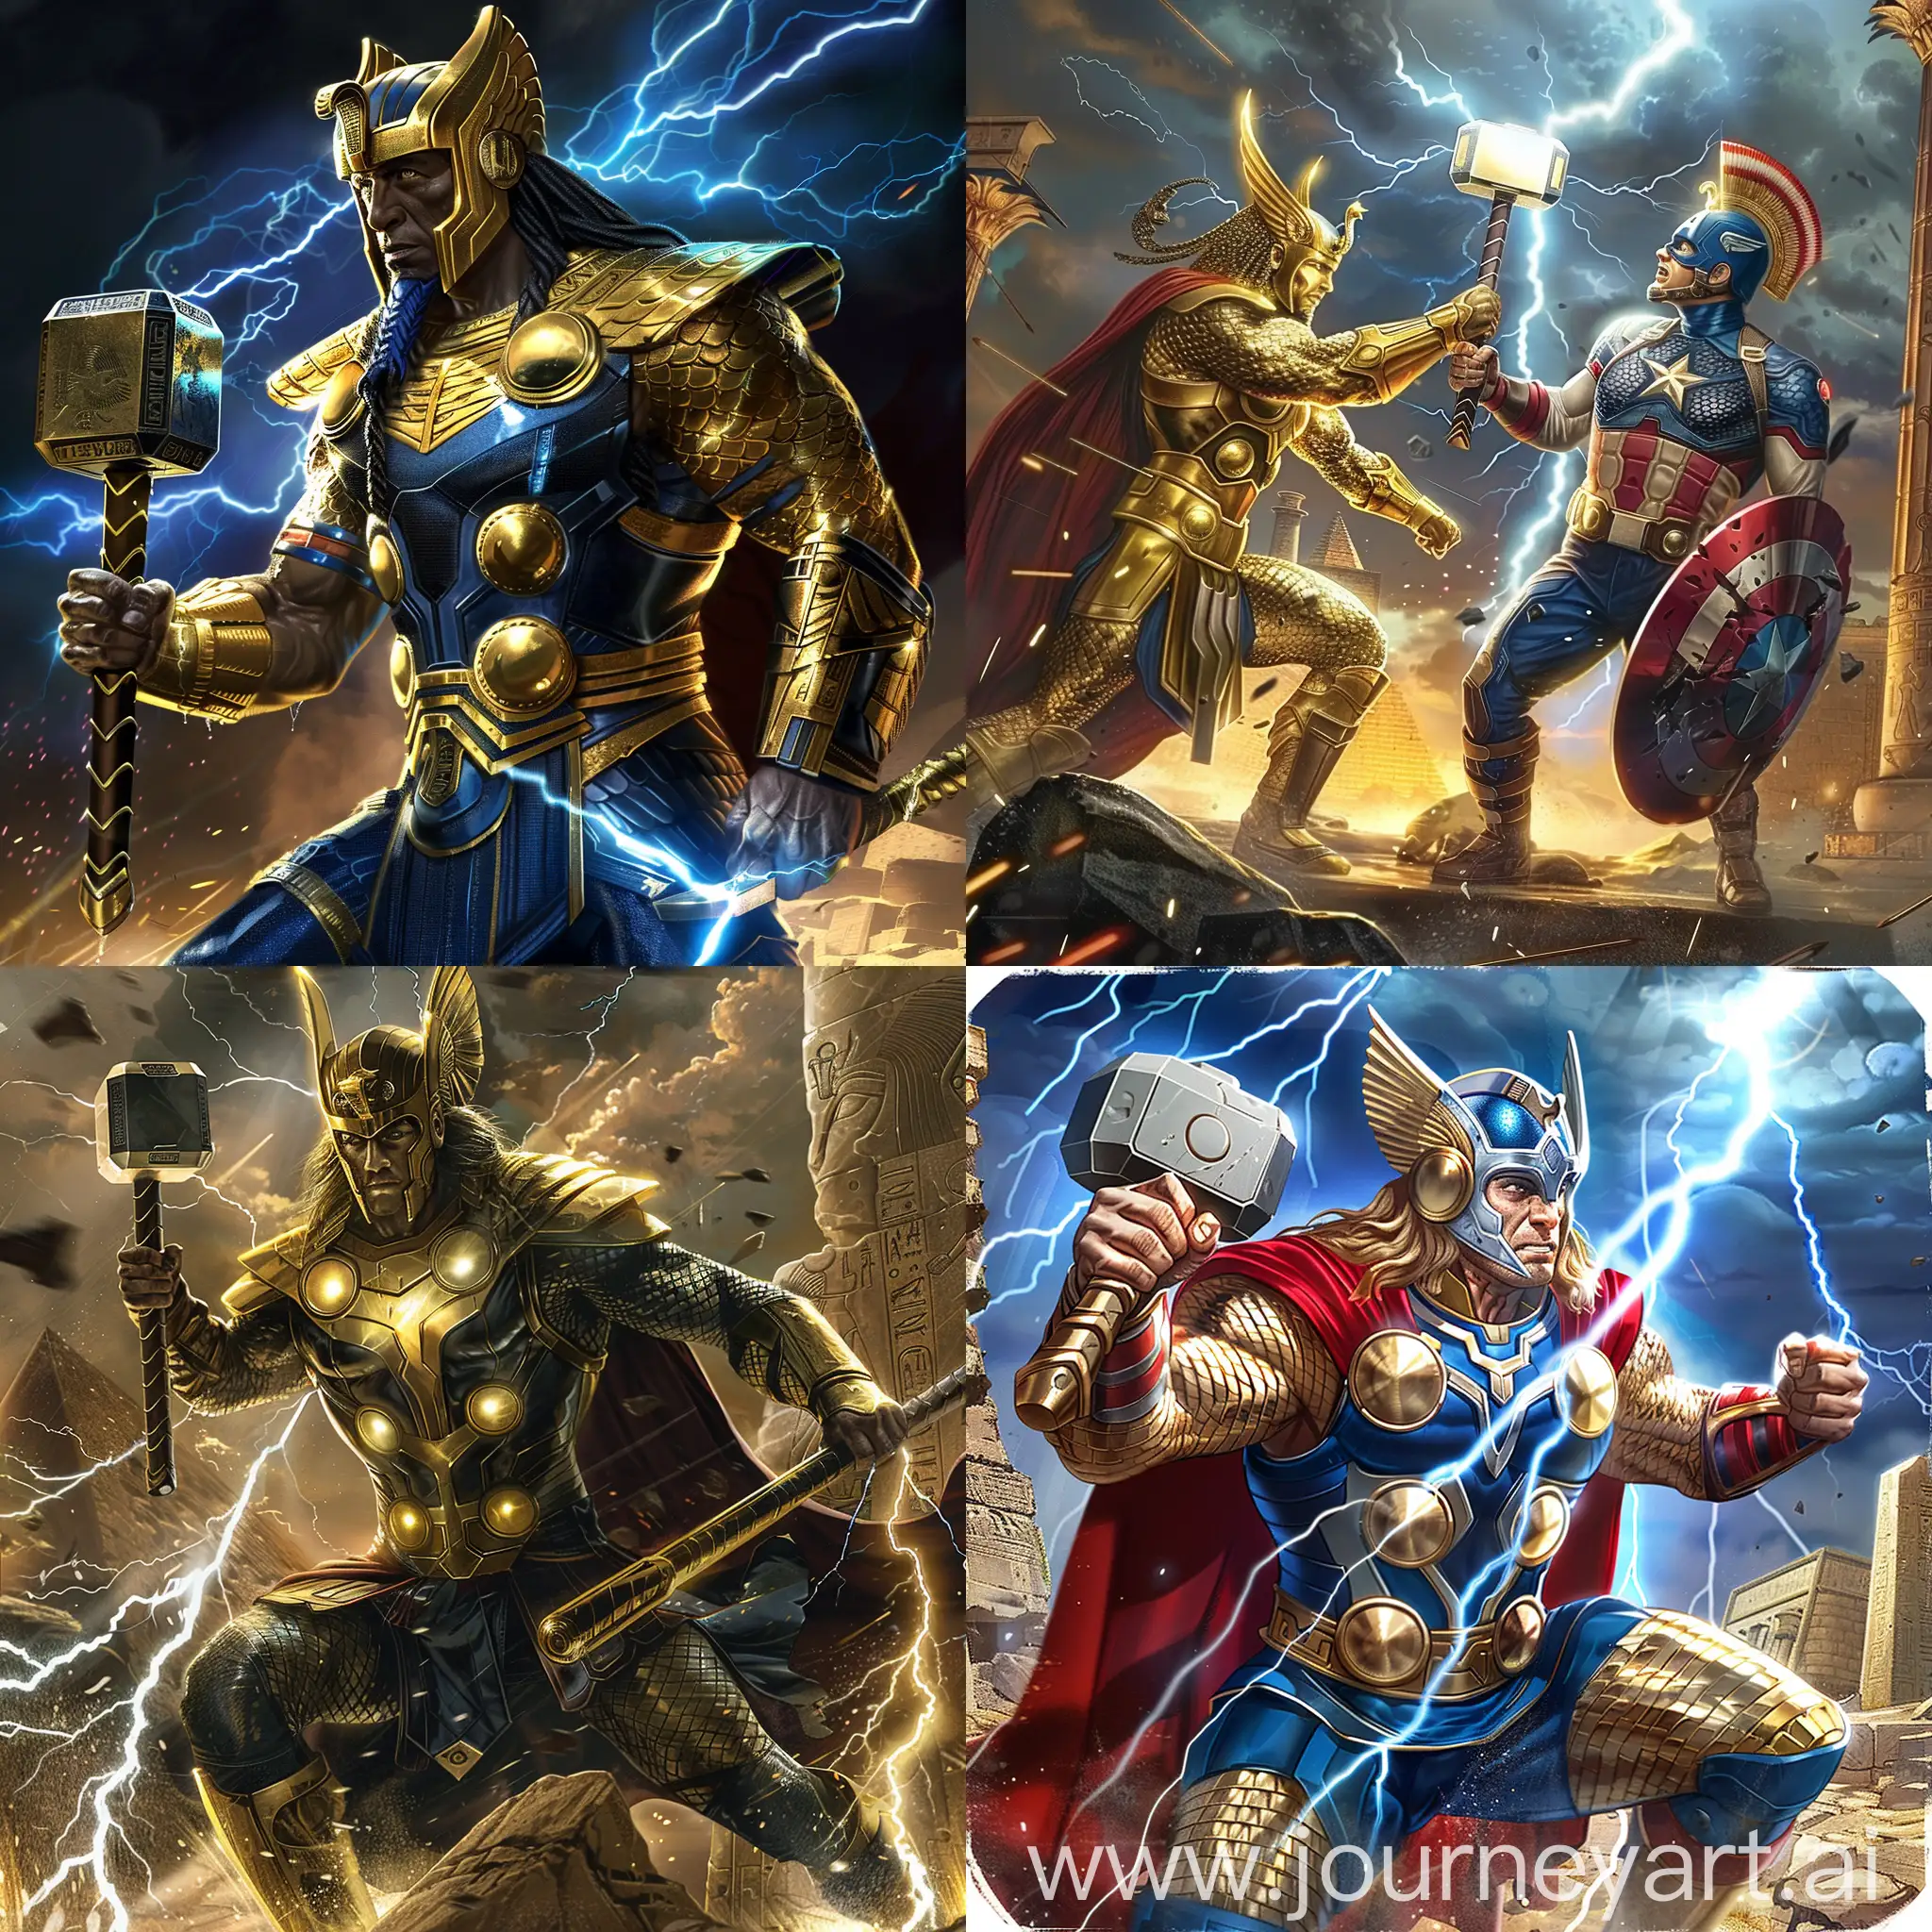 Epic-Battle-Superheroes-Clash-with-Ancient-Egyptian-Powers